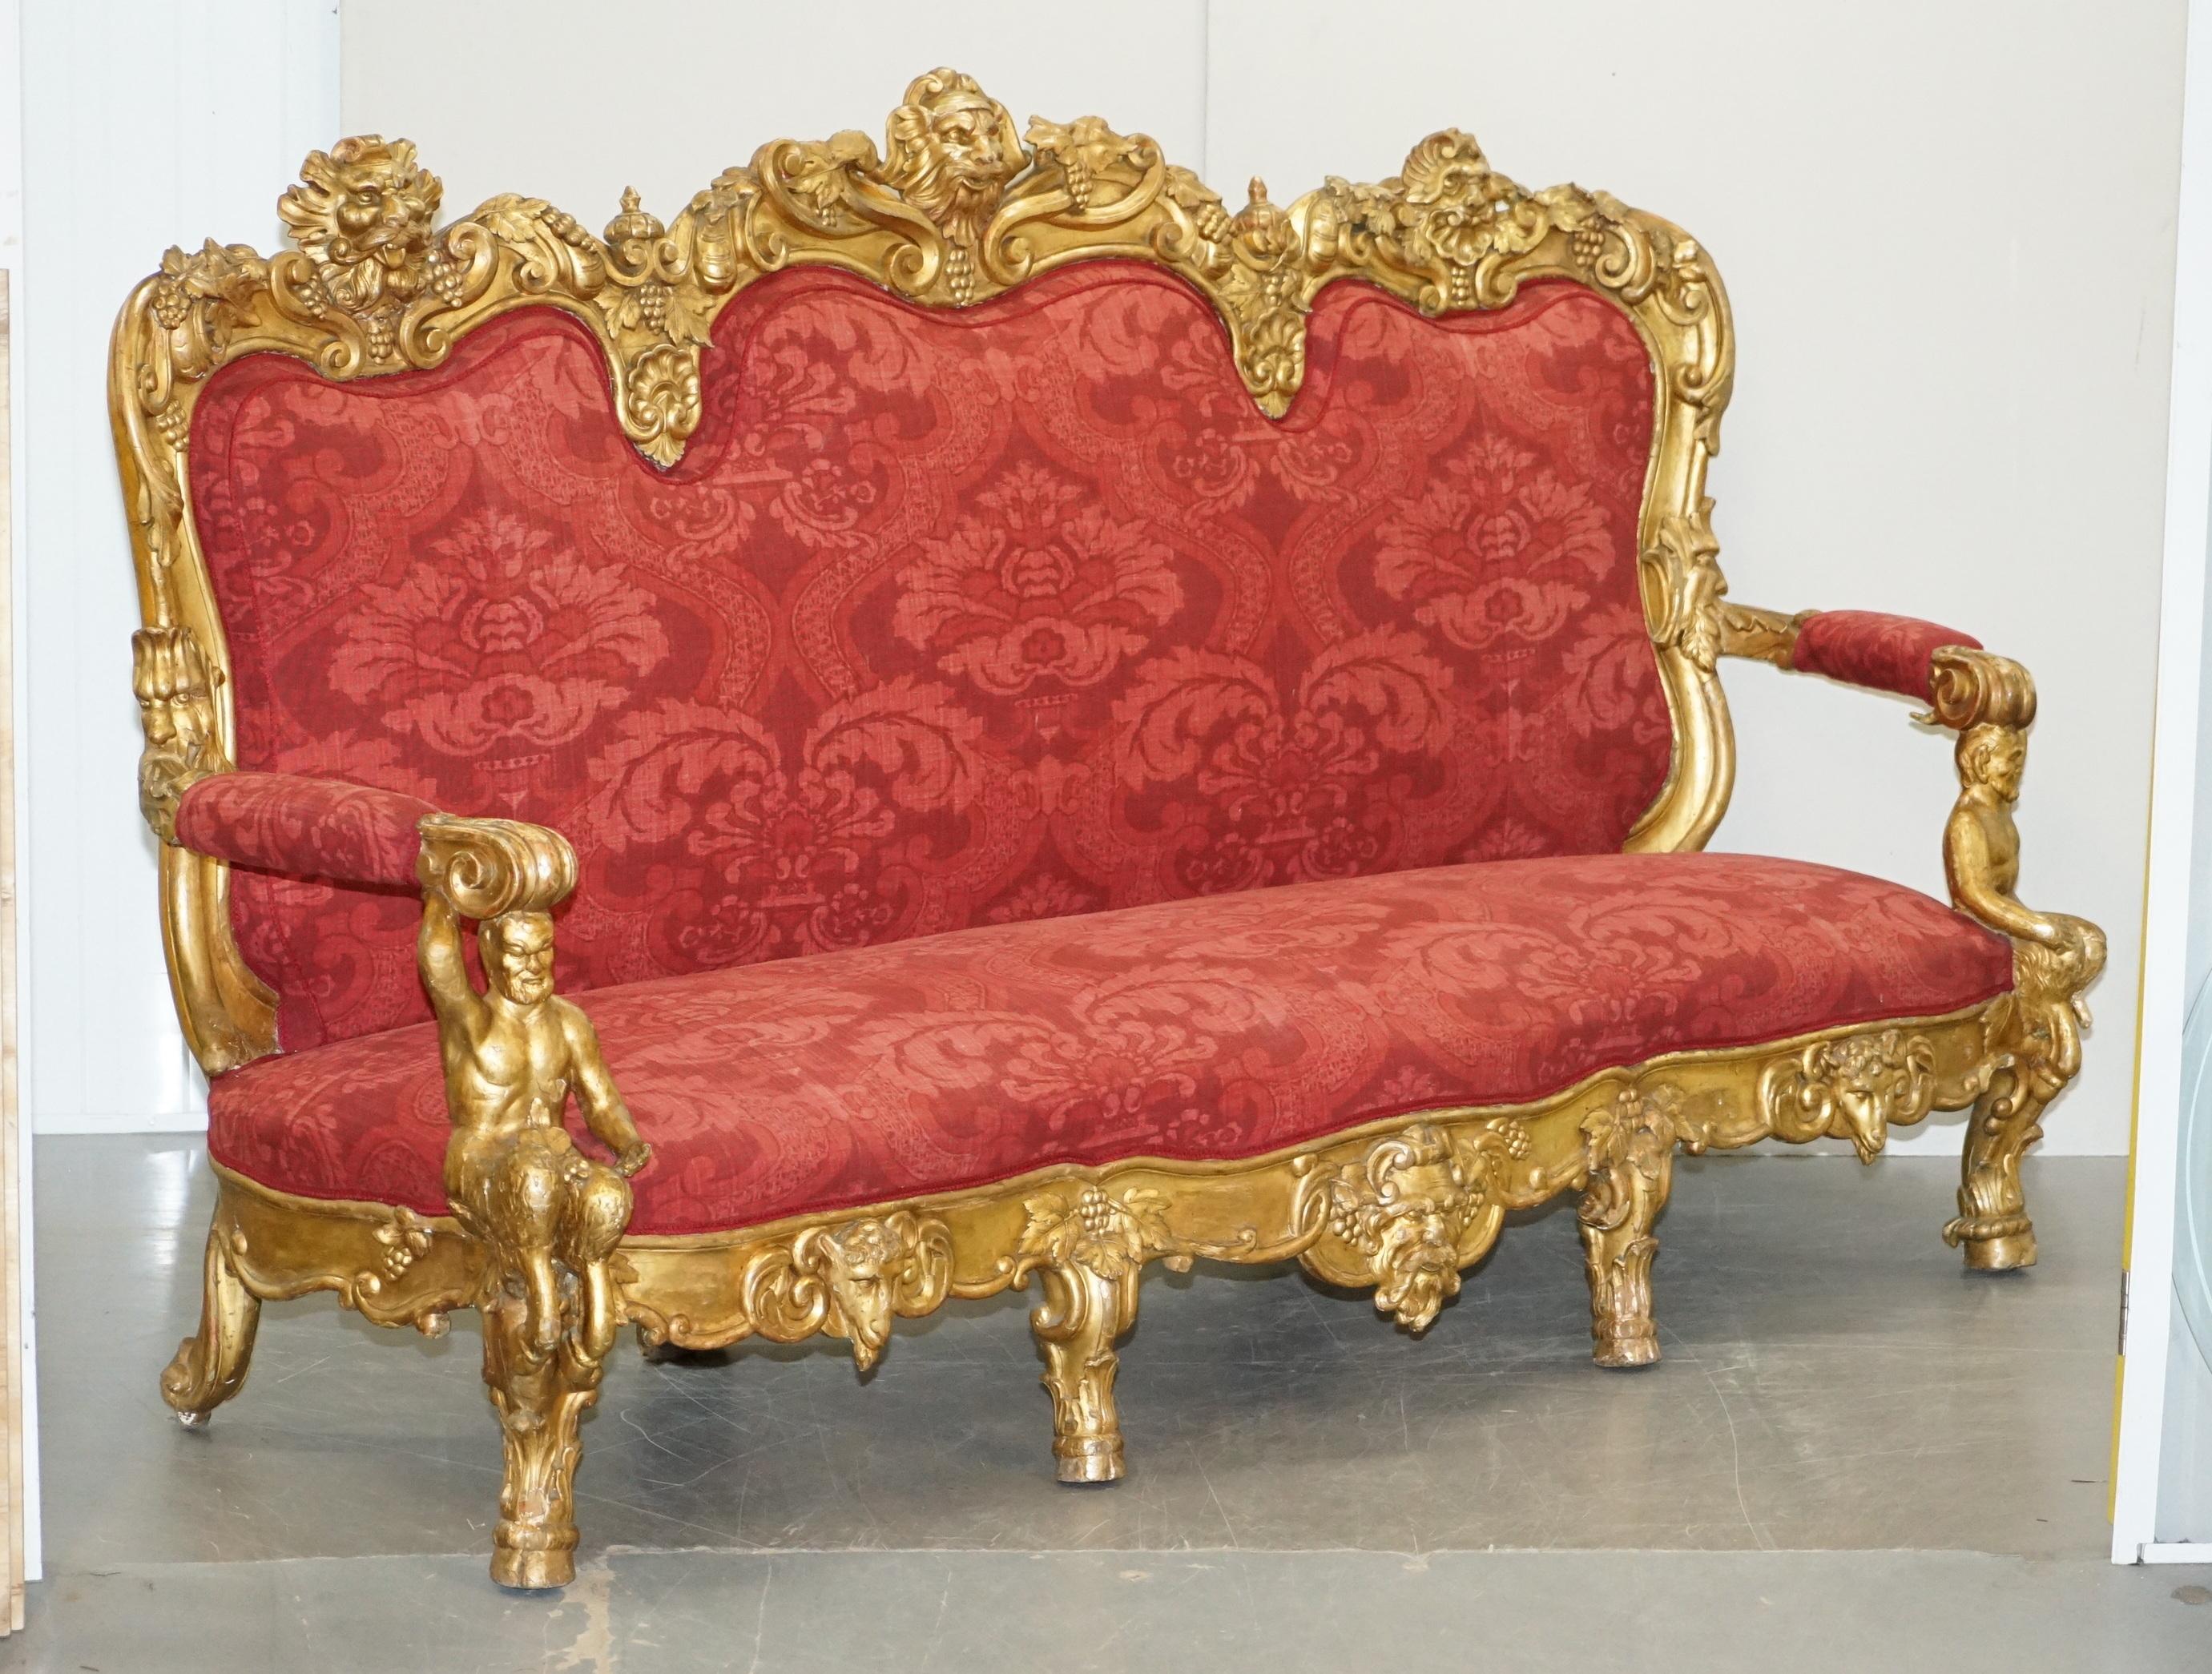 We are delighted to offer for sale this sublime circa 1860 handmade in Paris France Baroque gold giltwood bench settee

A very decorative and well made piece, it dates to the late Louis Phillippe era and is very much in the classical Baroque